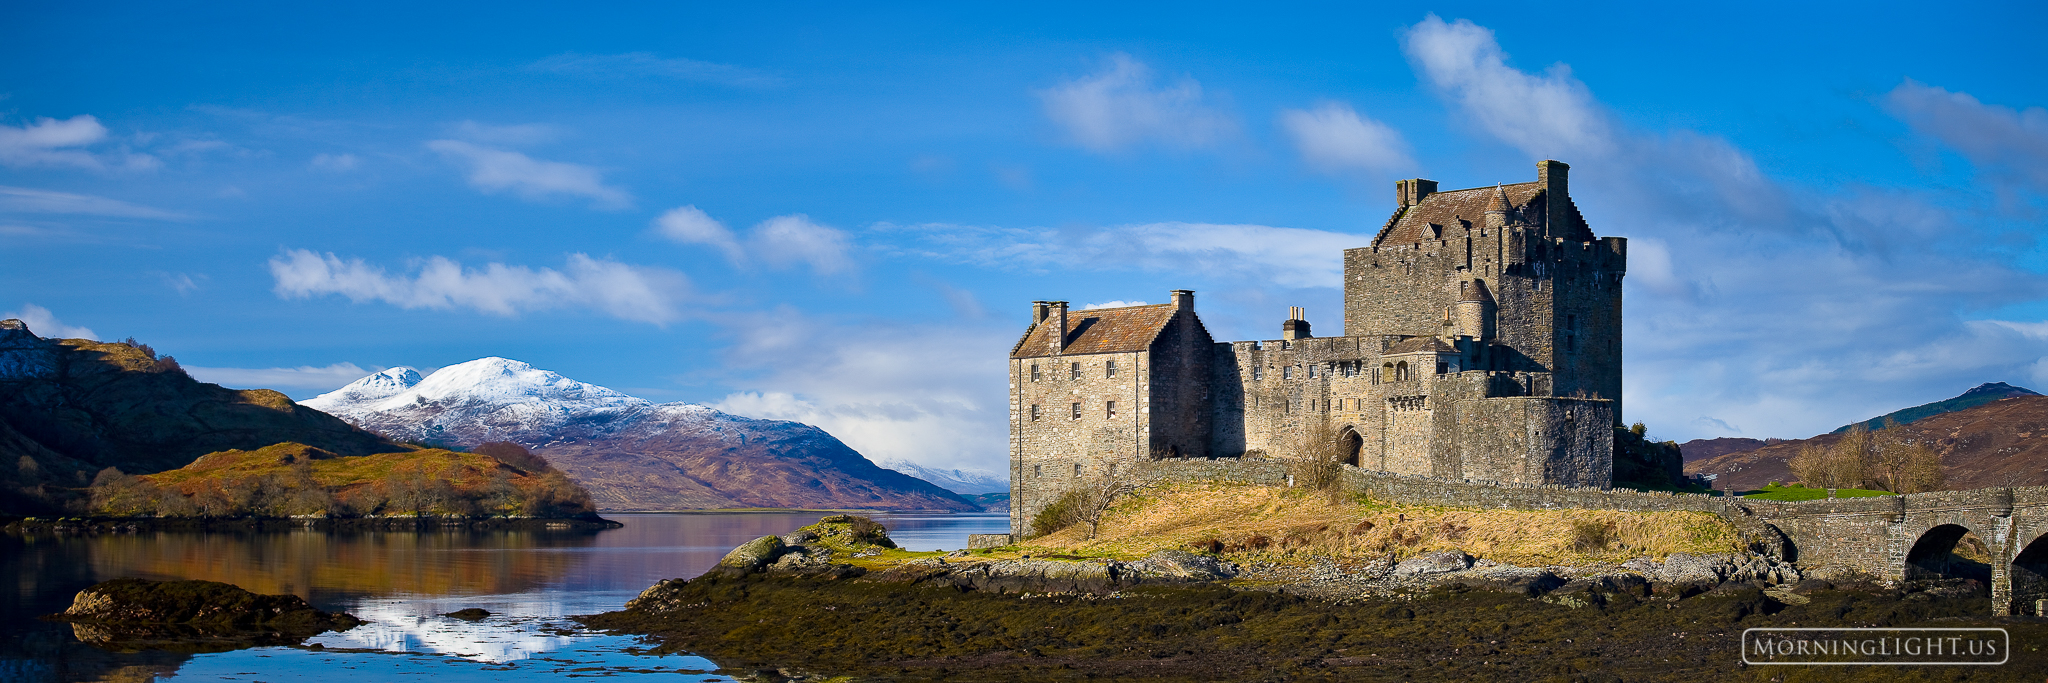 The sun came out for a while on this day allowing us to shoot the beautiful and iconic Eilean Donan Castle on Loch Duich in the...